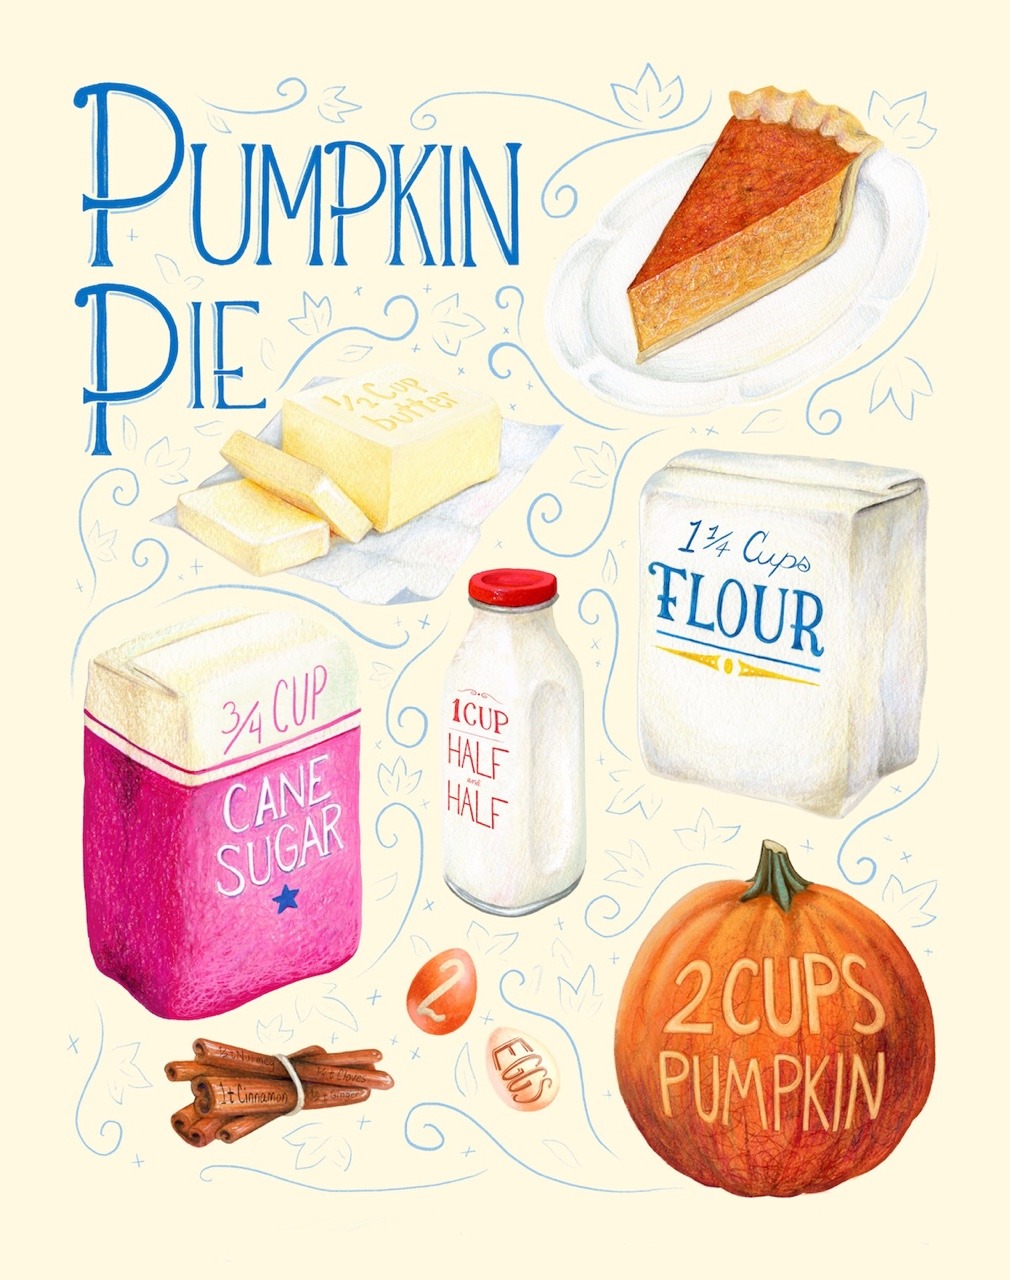 Water colour illustrations of pumkin pie ingredients by Kendyll Hillegas https://kendyllhillegas.tumblr.com/post/182918505284/something-a-little-different-that-i-made-back-in